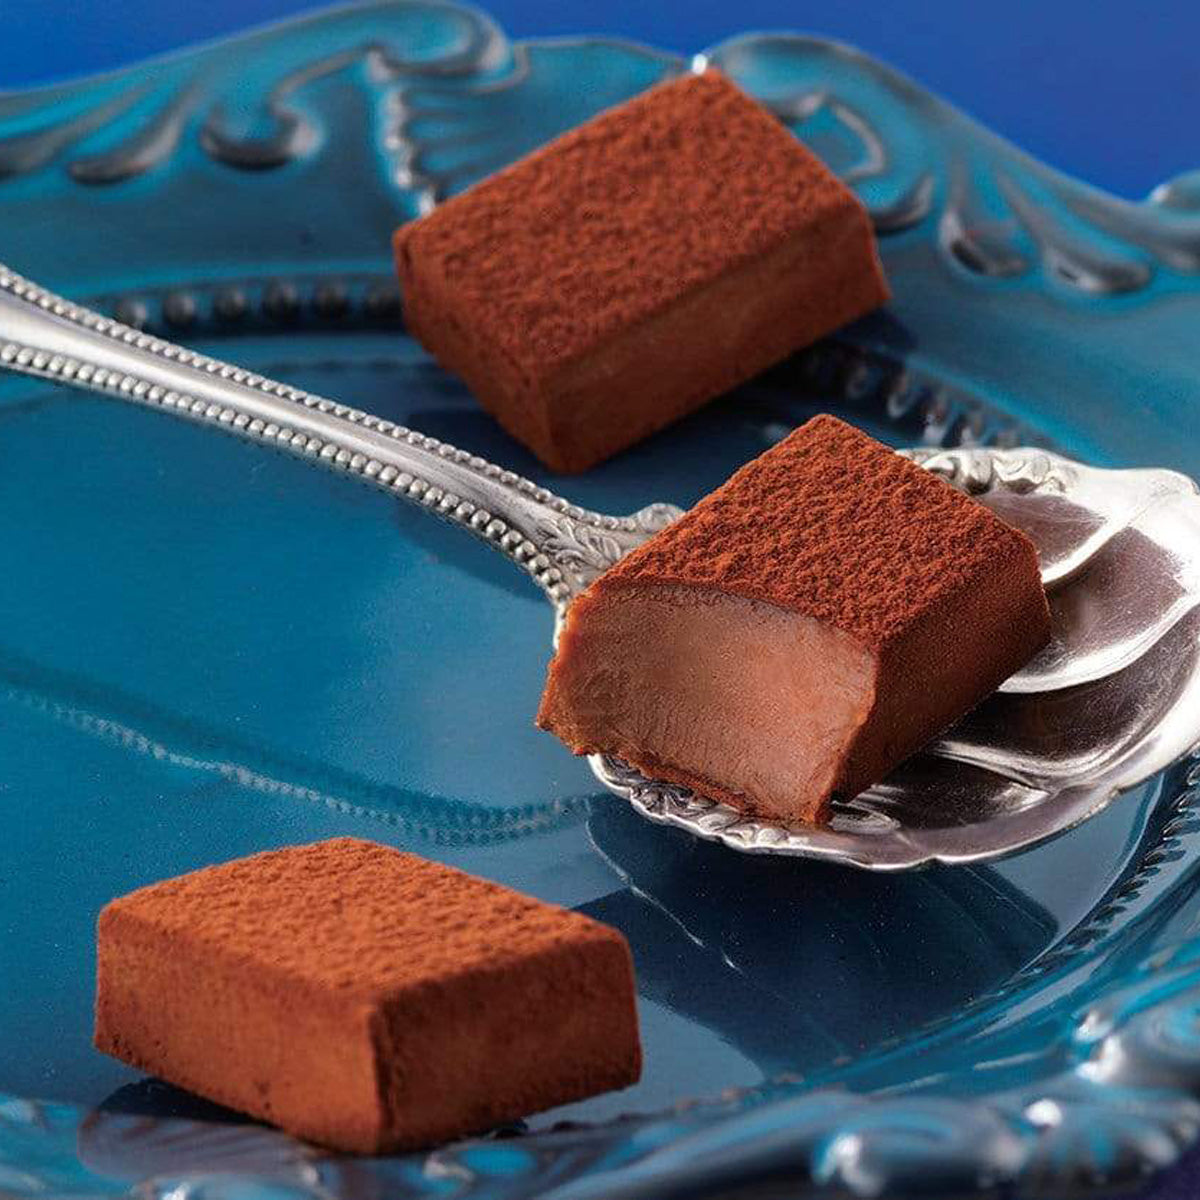 ROYCE' Chocolate - Nama Chocolate "Au Lait" - Image shows brown blocks of chocolate on a blue plate with a silver spoon.